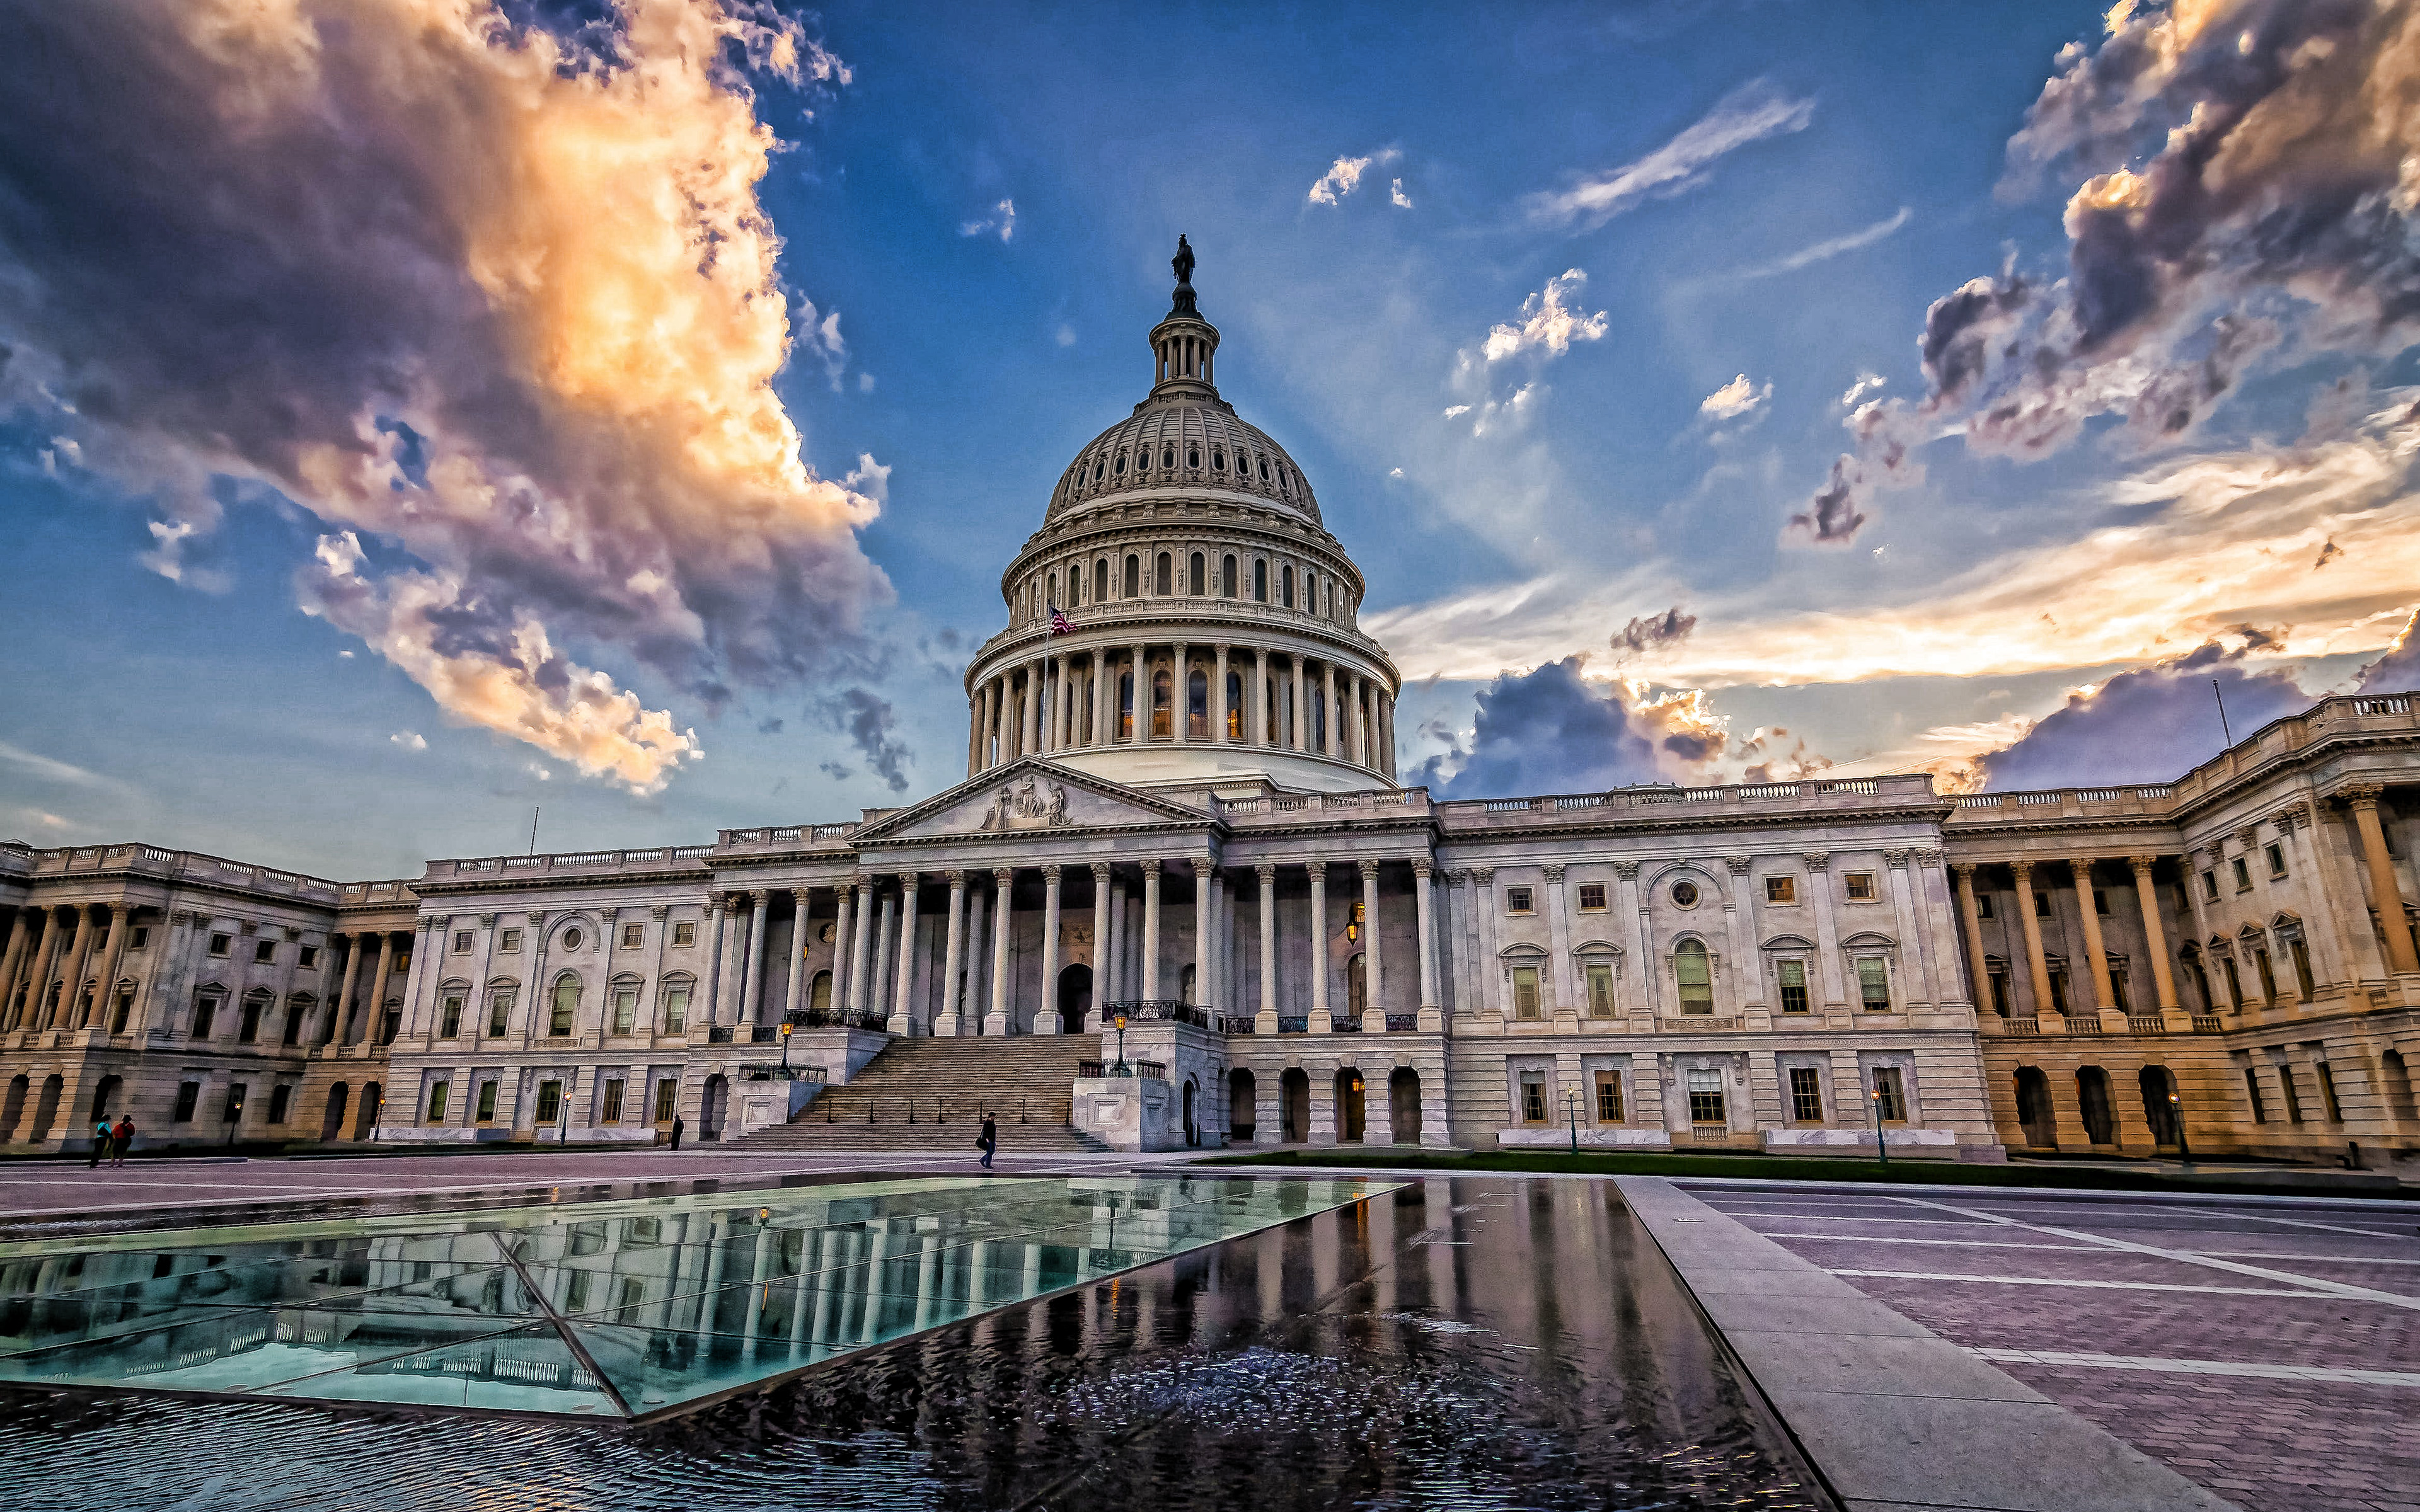 Download wallpaper United States Capitol, evening, sunset, fountain, Capitol Building, United States Congress, Washington, USA for desktop with resolution 3840x2400. High Quality HD picture wallpaper